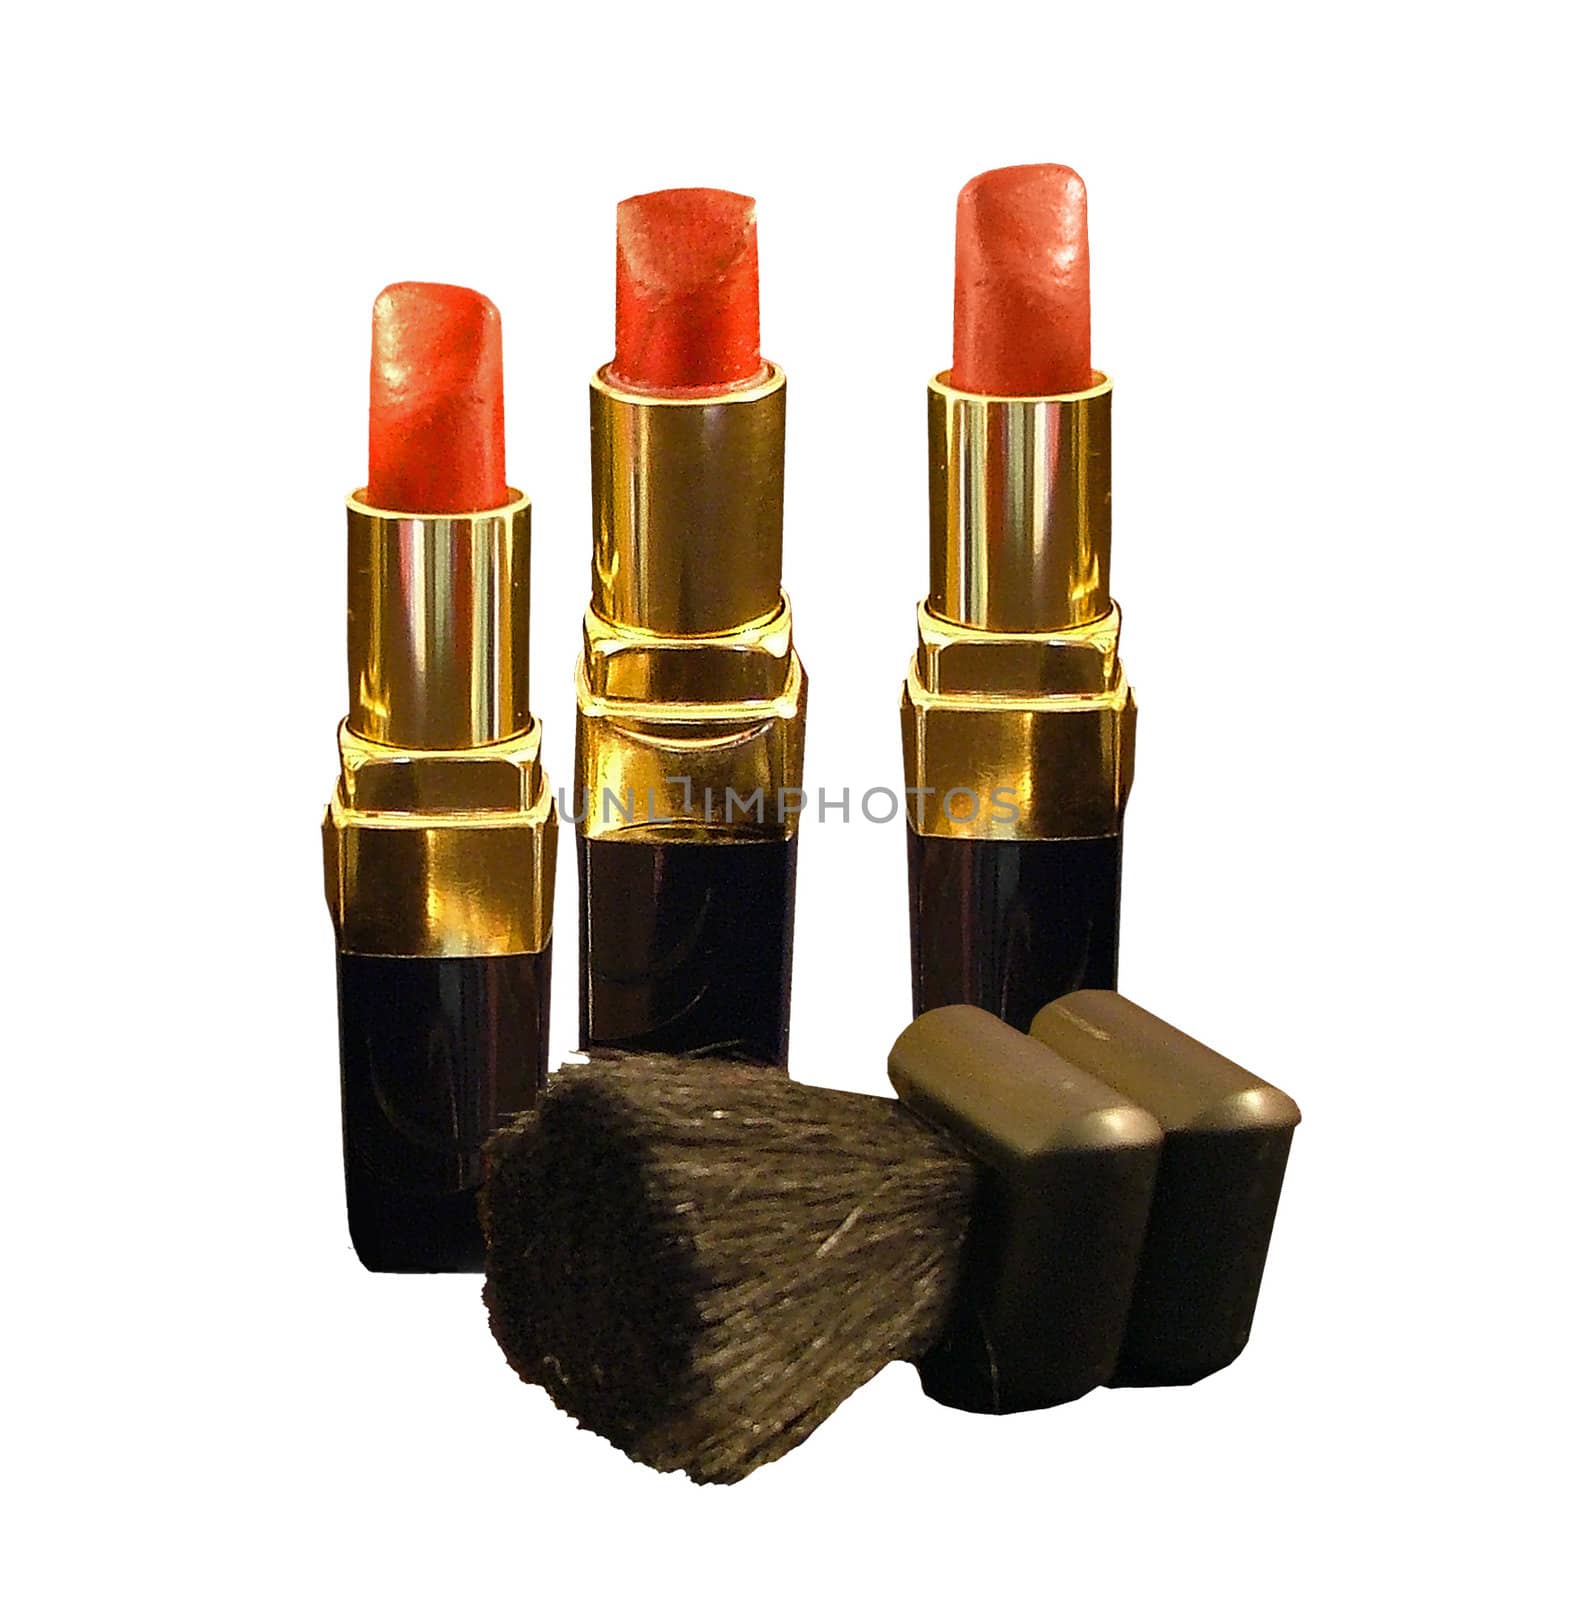 A group of bright red lipsticks